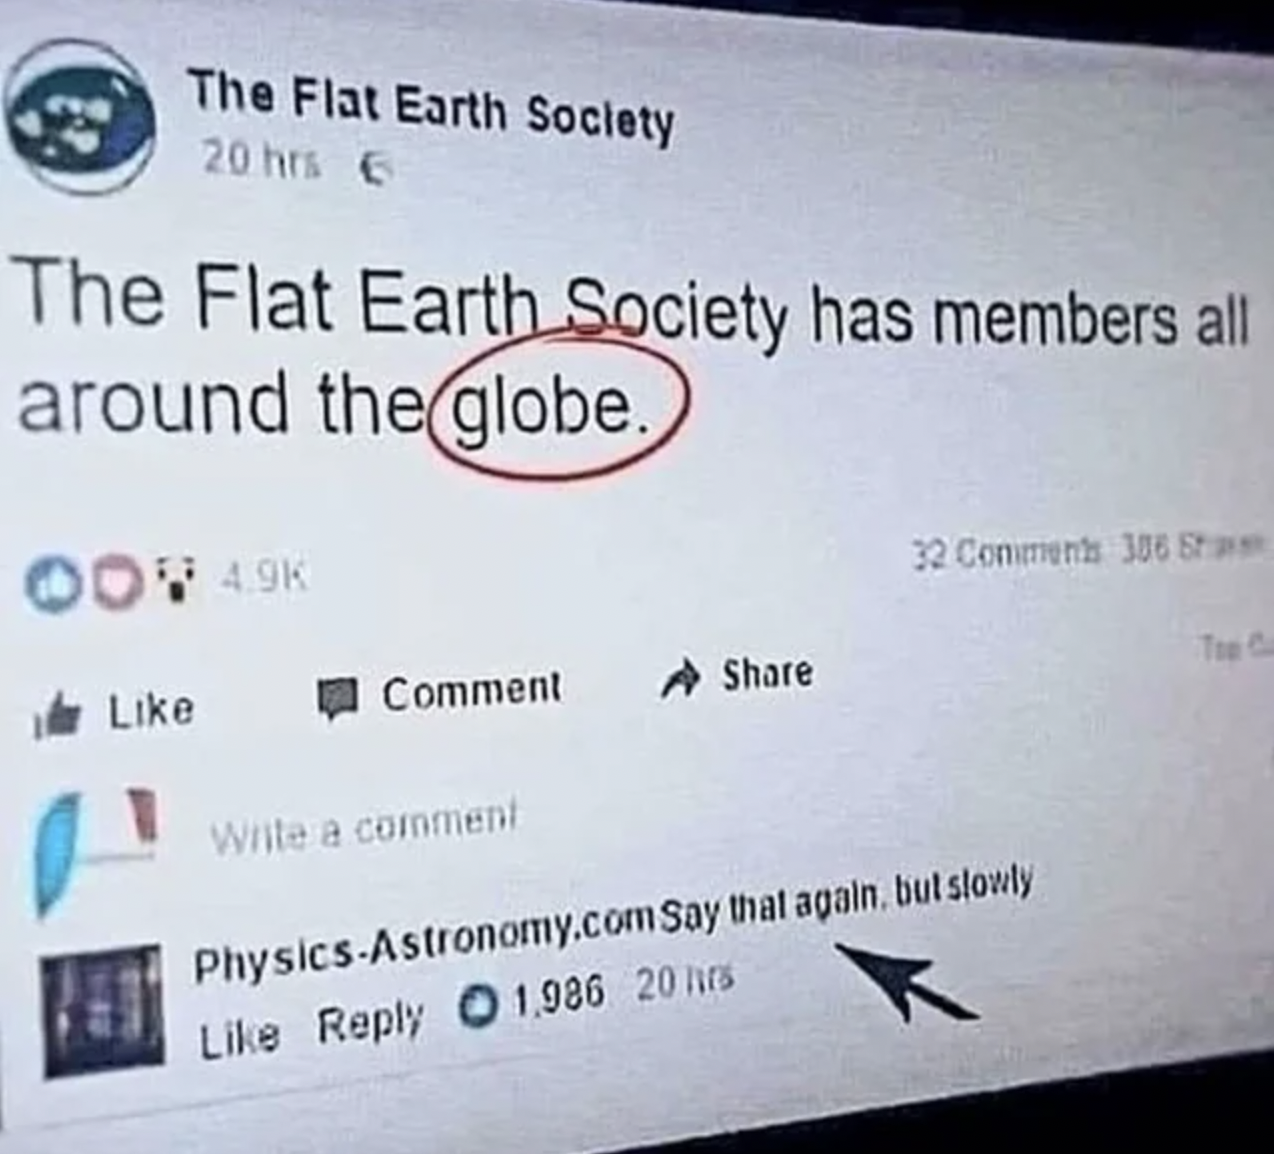 document - The Flat Earth Society 20 hrs G The Flat Earth Society has members all around the globe.